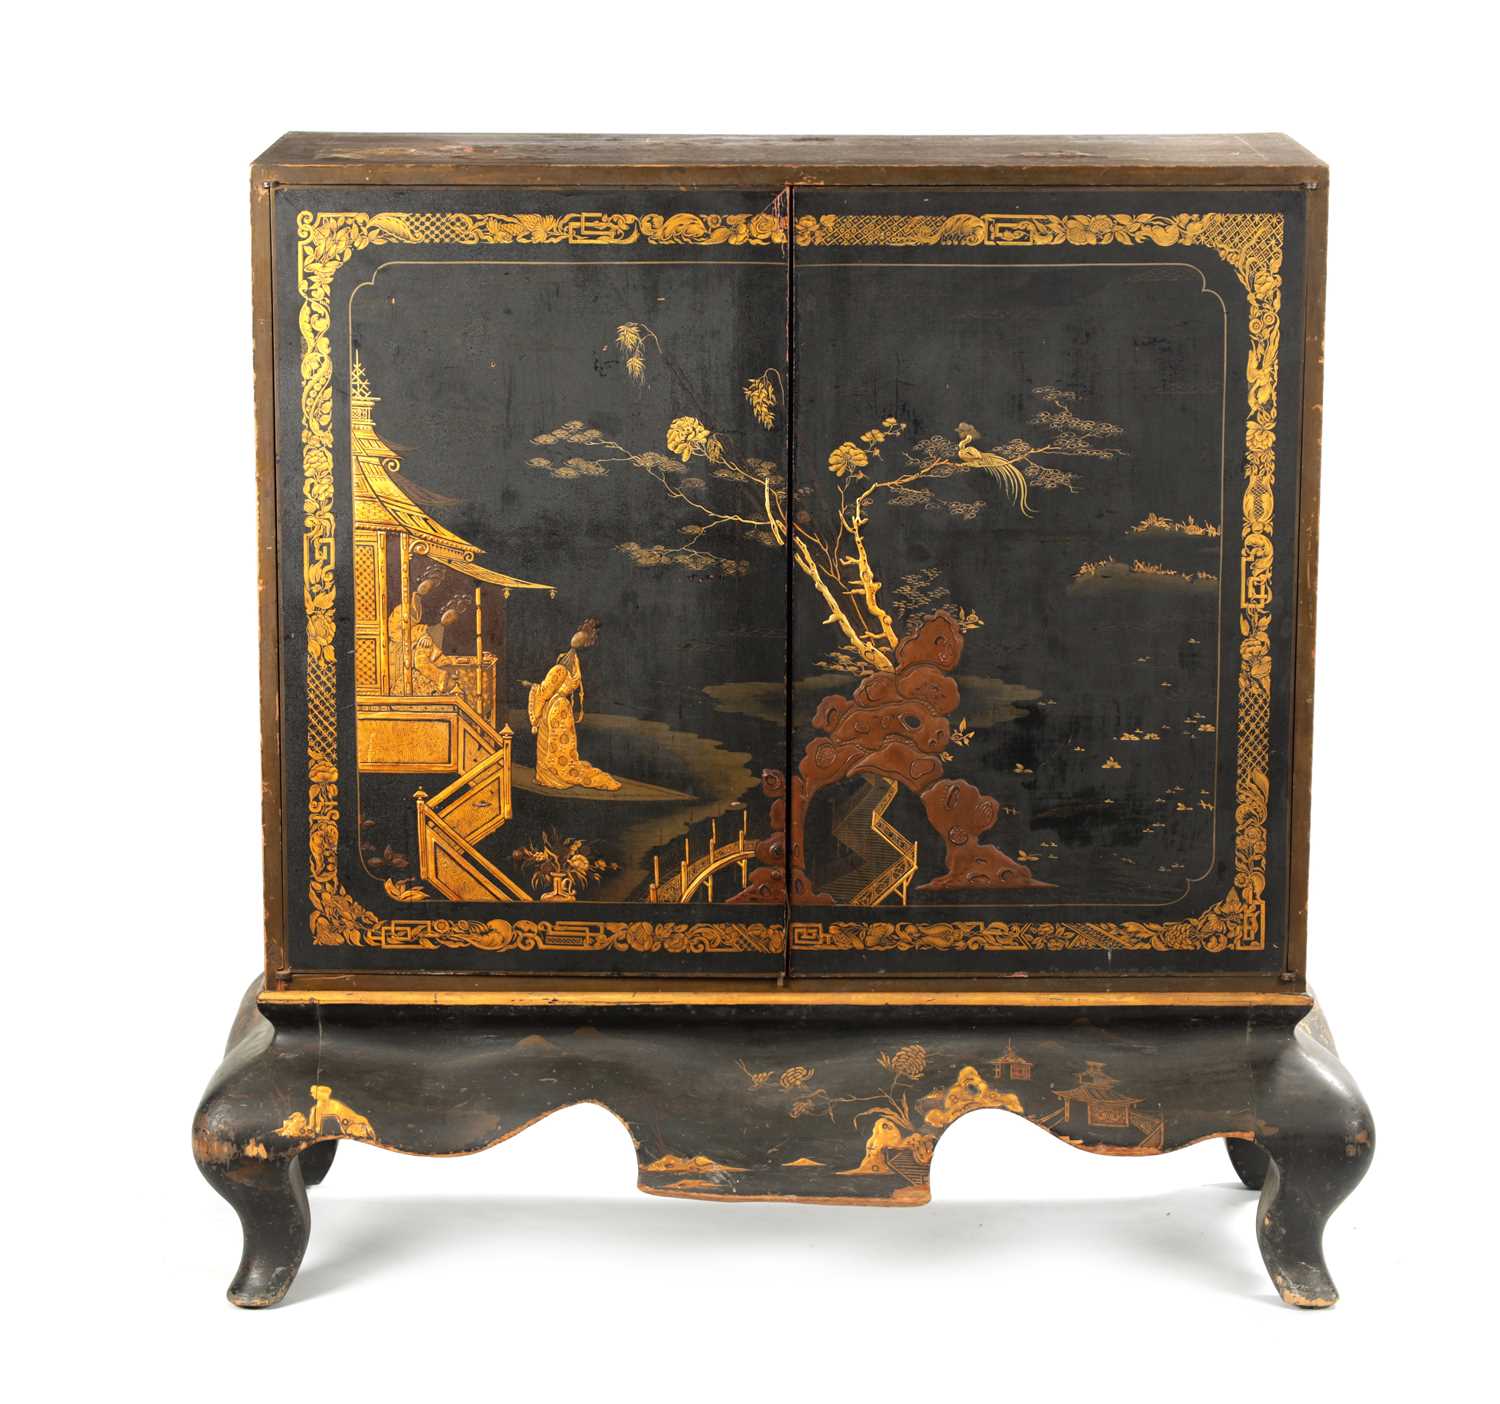 AN ENGLISH REGENCY CHINOISERIE DECORATED LACQUERWORK CABINET ON STAND